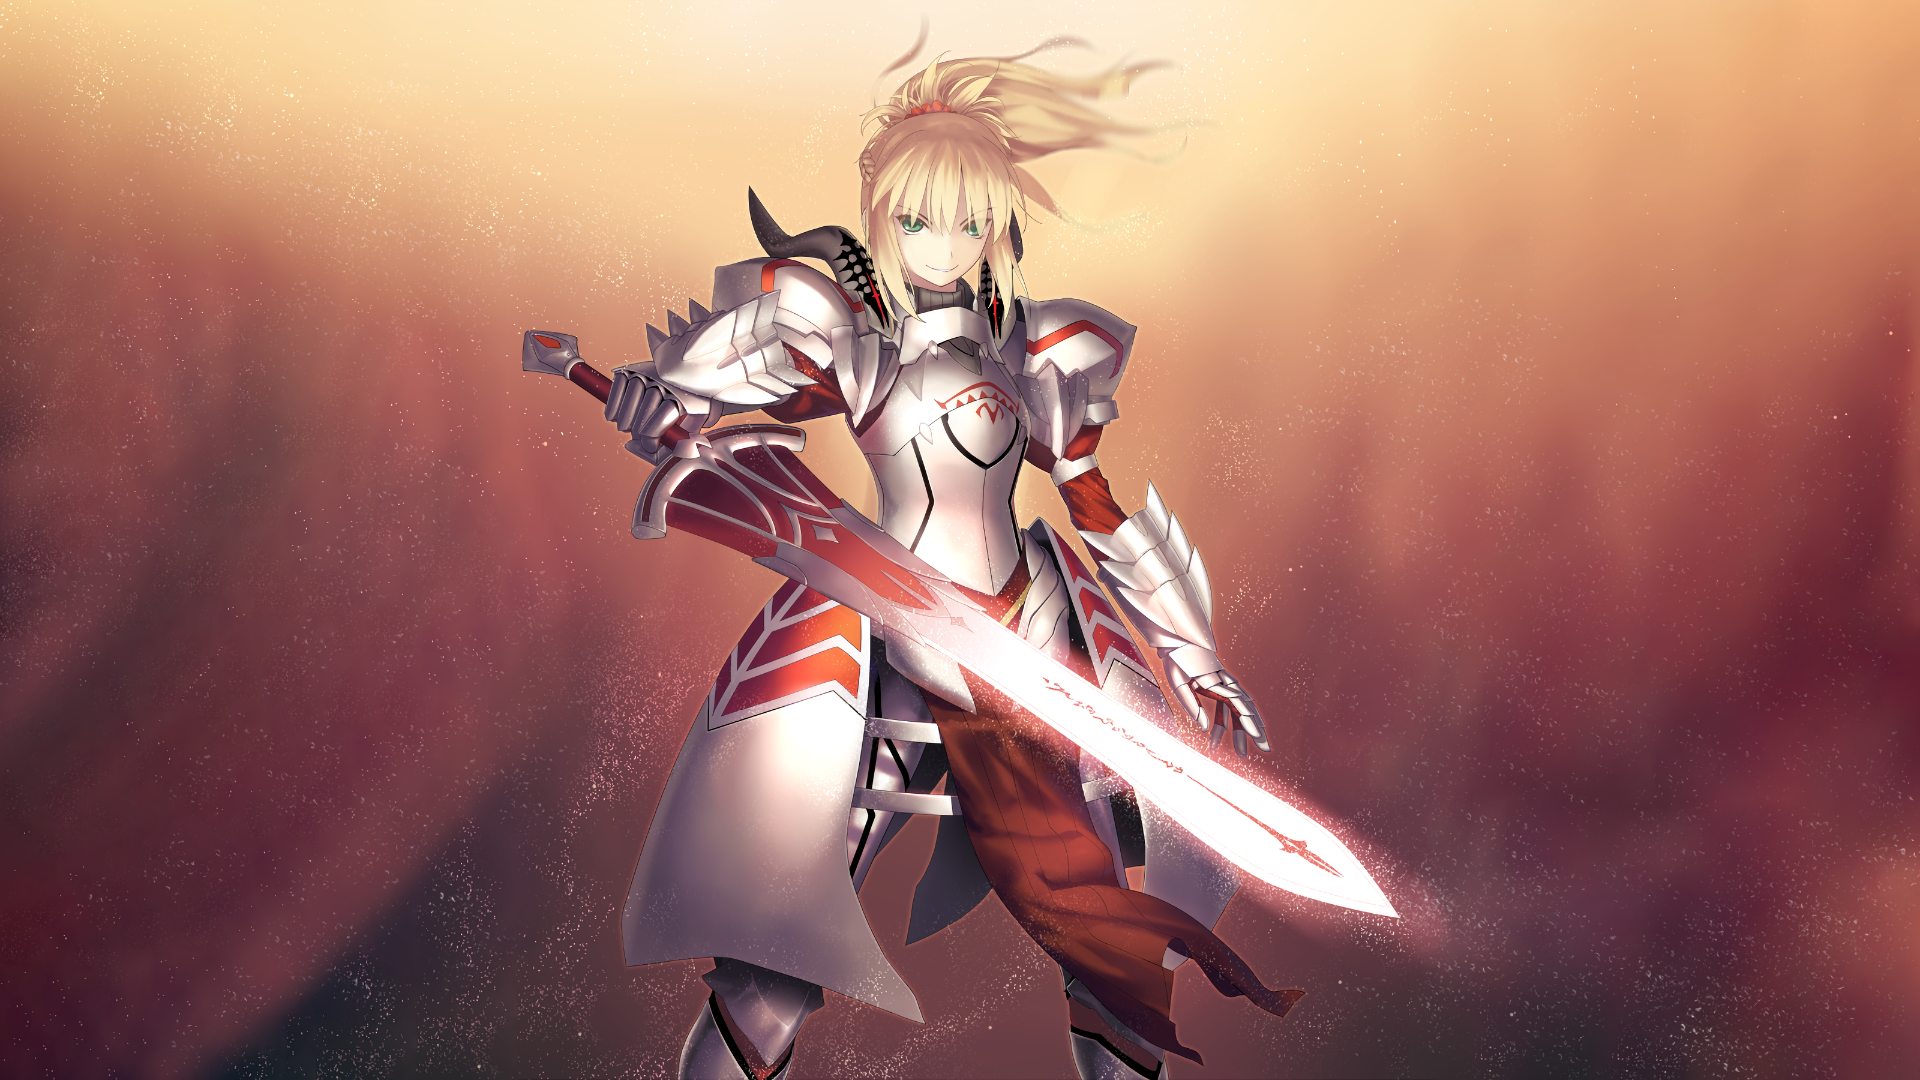 Anime 1920x1080 Fate series Fate/Grand Order Mordred (Fate/Apocrypha) anime girls fantasy art fantasy girl sword weapon women with swords girls with guns armor fantasy armor blonde anime